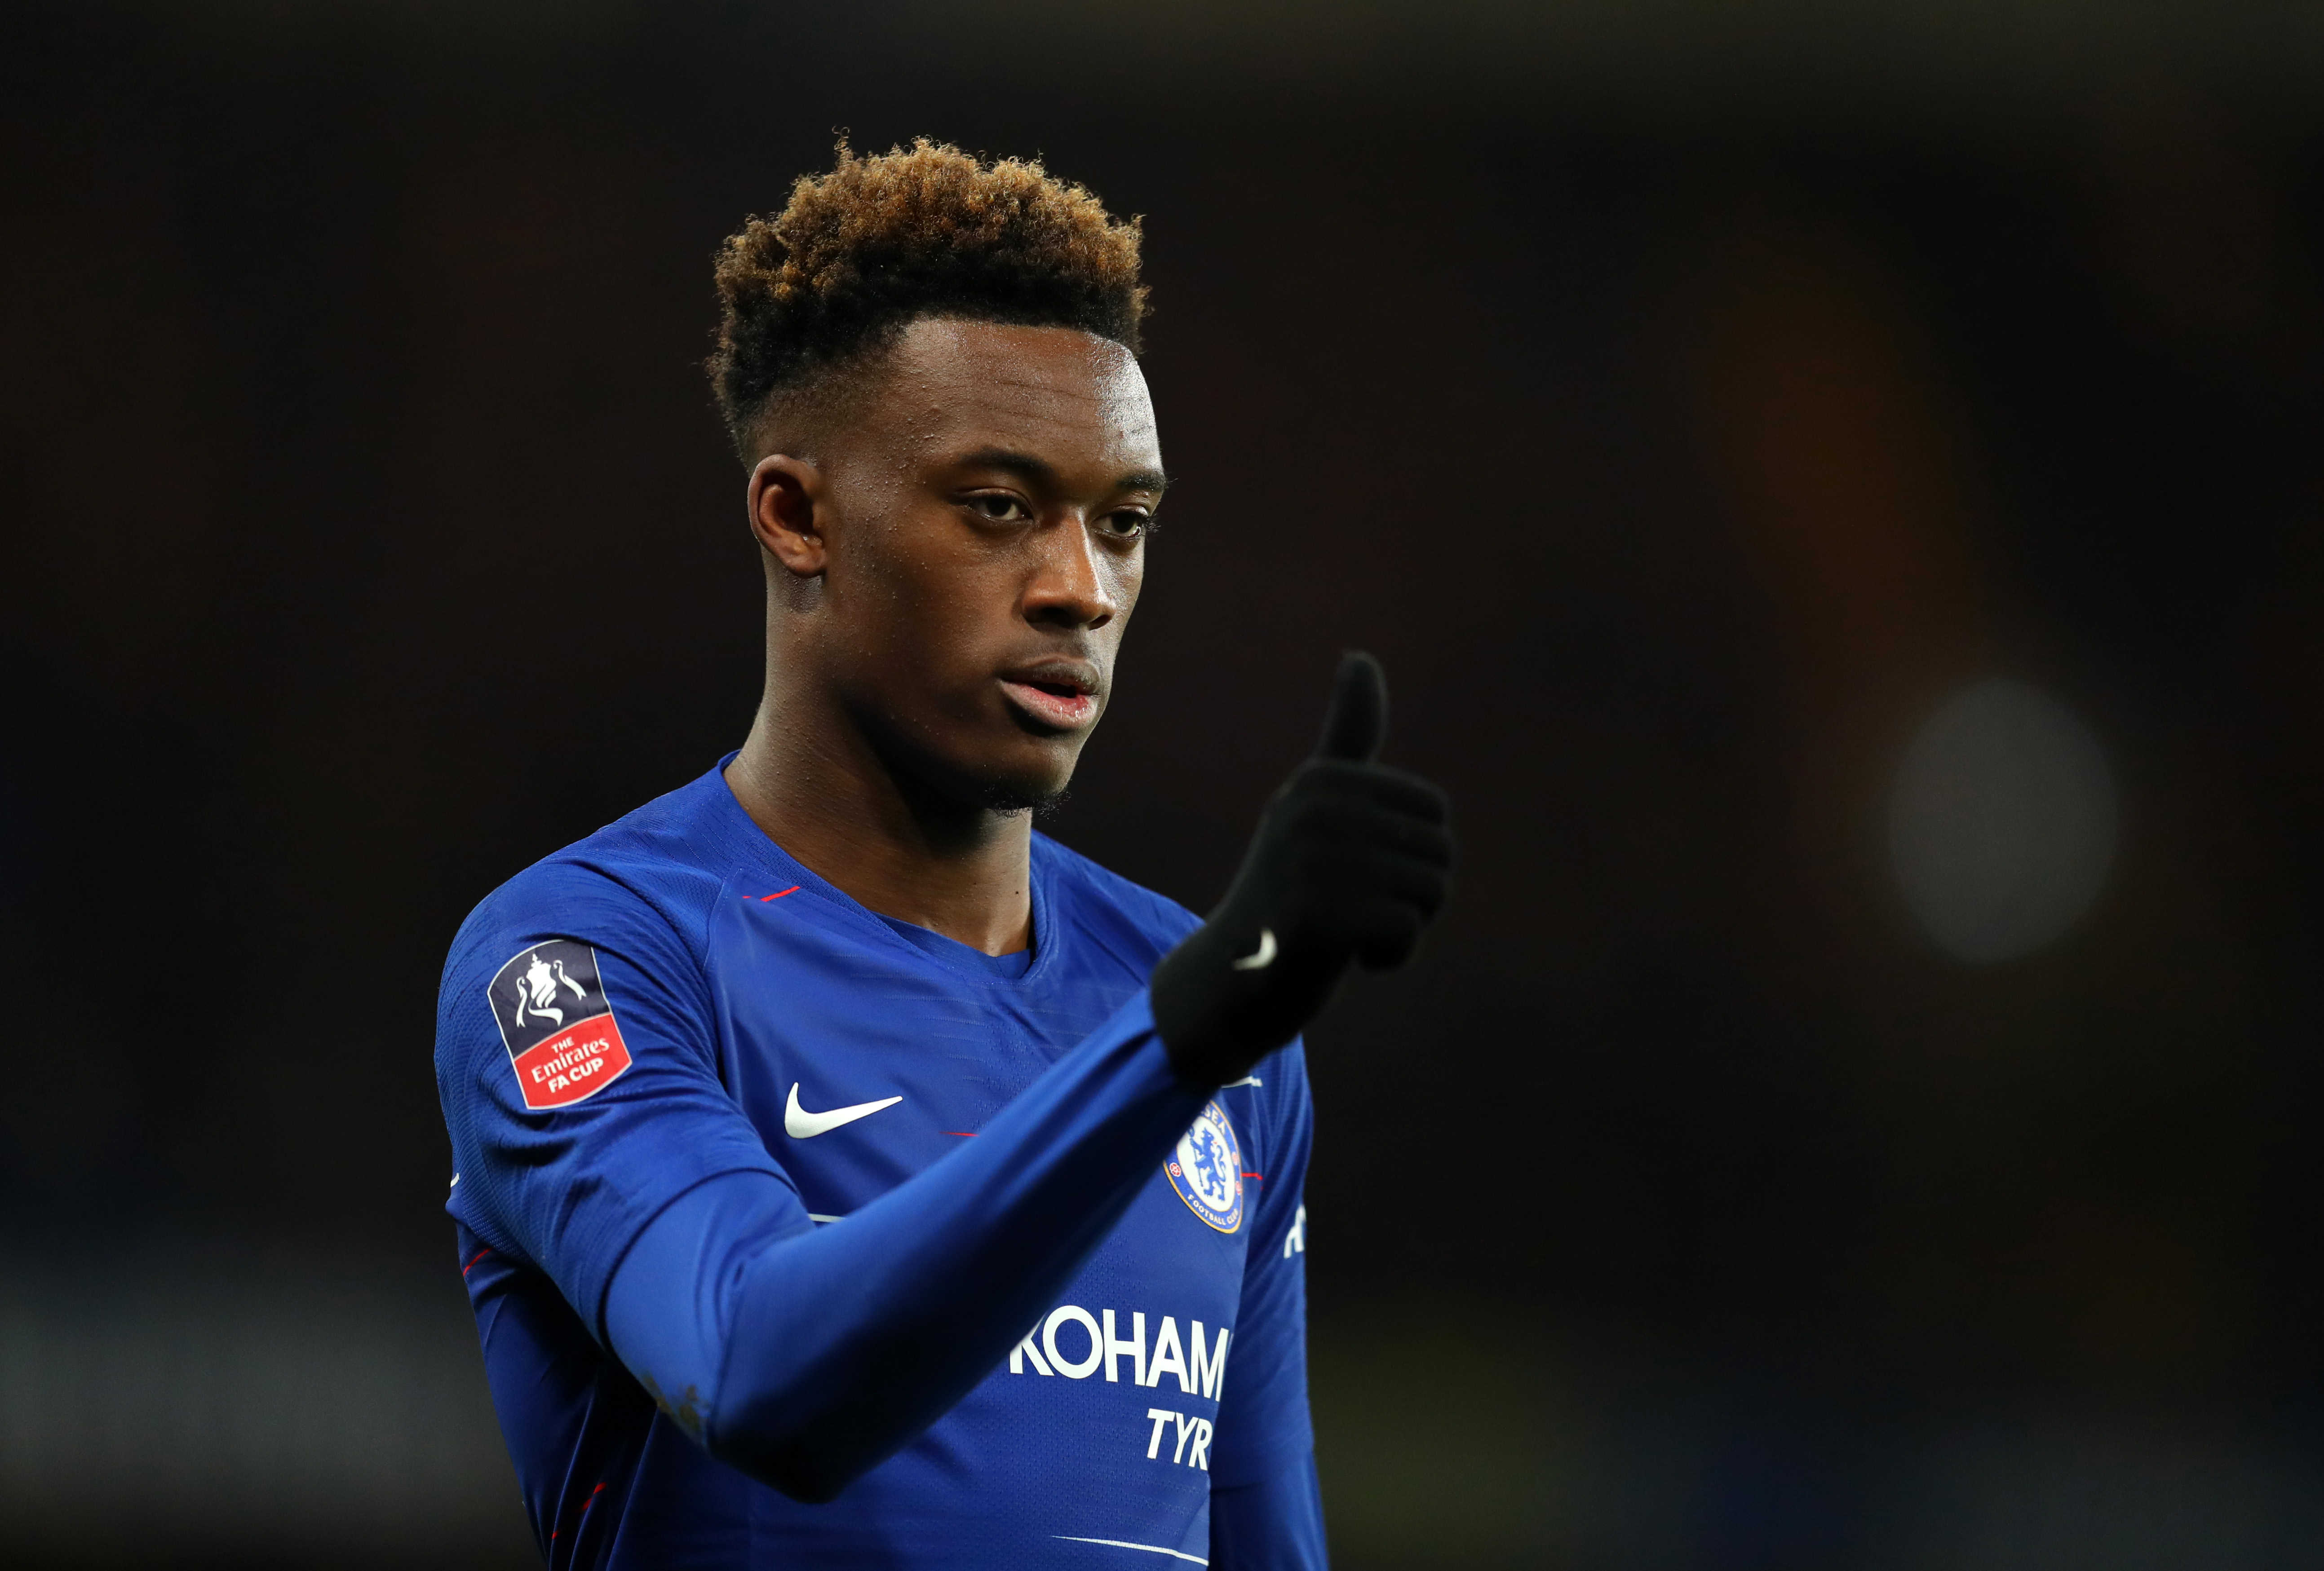 LONDON, ENGLAND - JANUARY 27:  Callum Hudson-Odoi of Chelsea during the FA Cup Fourth Round match between Chelsea and Sheffield Wednesday at Stamford Bridge on January 27, 2019 in London, United Kingdom. (Photo by Catherine Ivill/Getty Images)